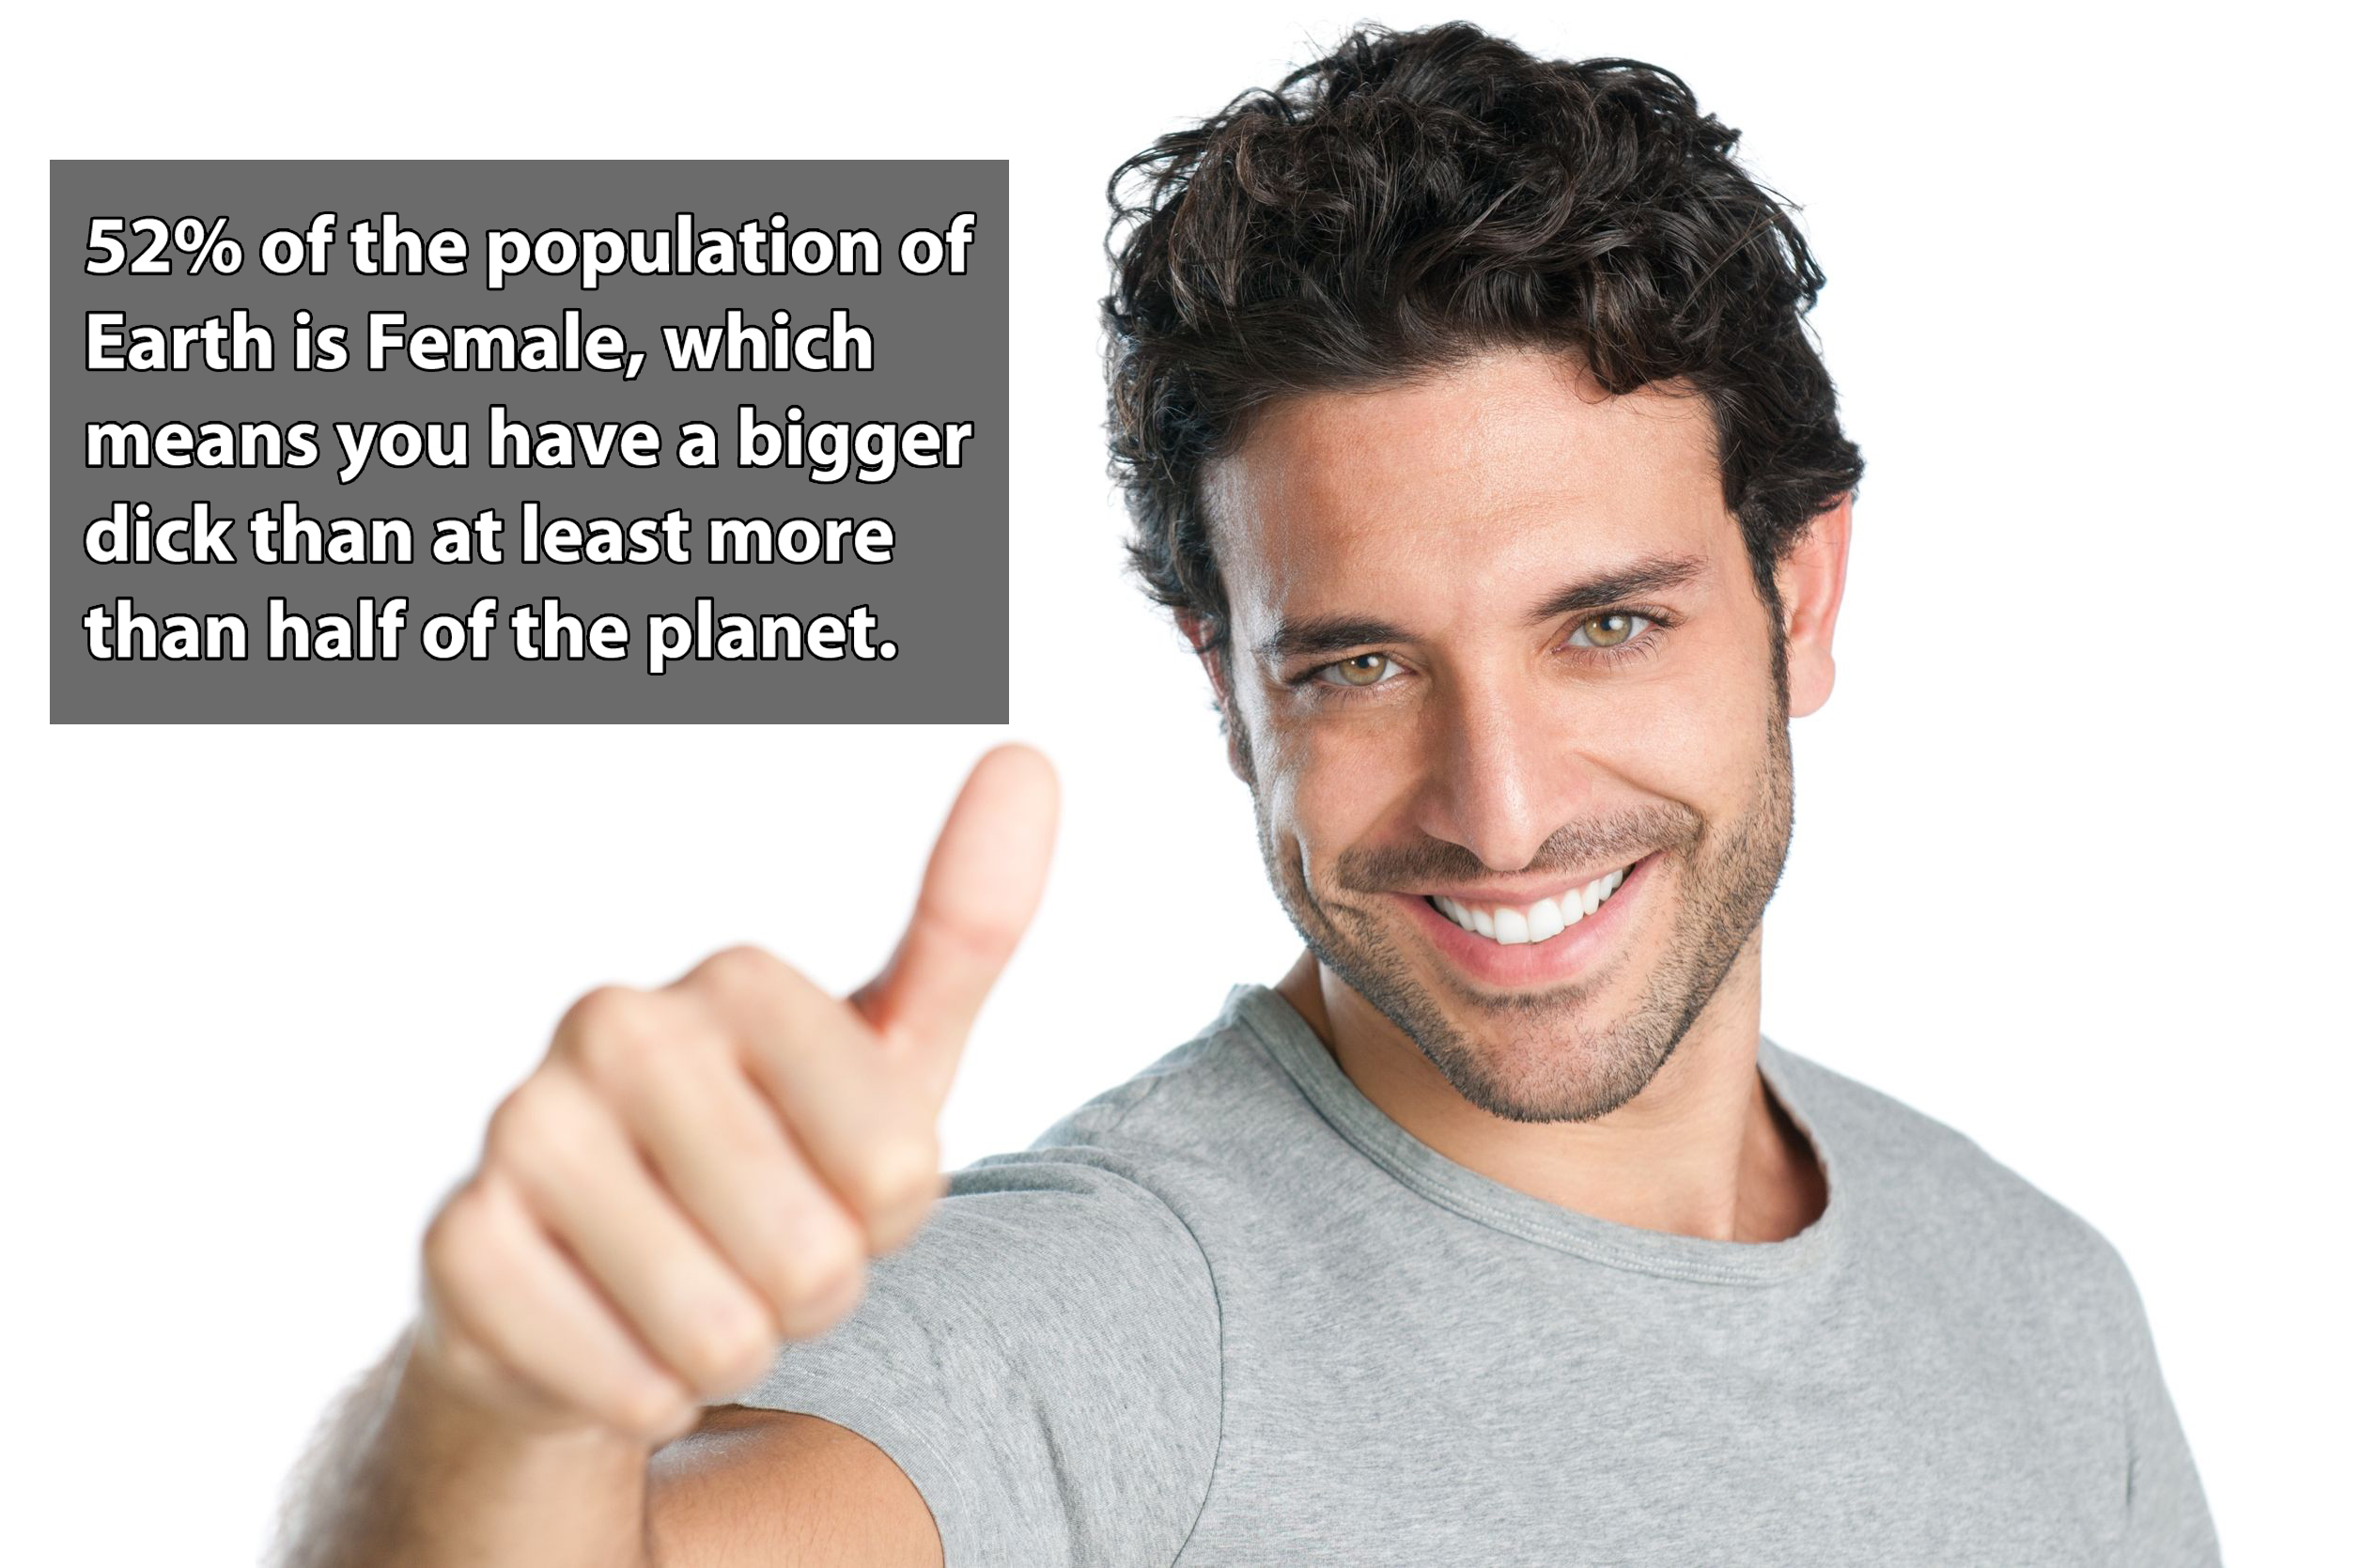 smile man - 52% of the population of Earth is Female, which means you have a bigger dick than at least more than half of the planet.